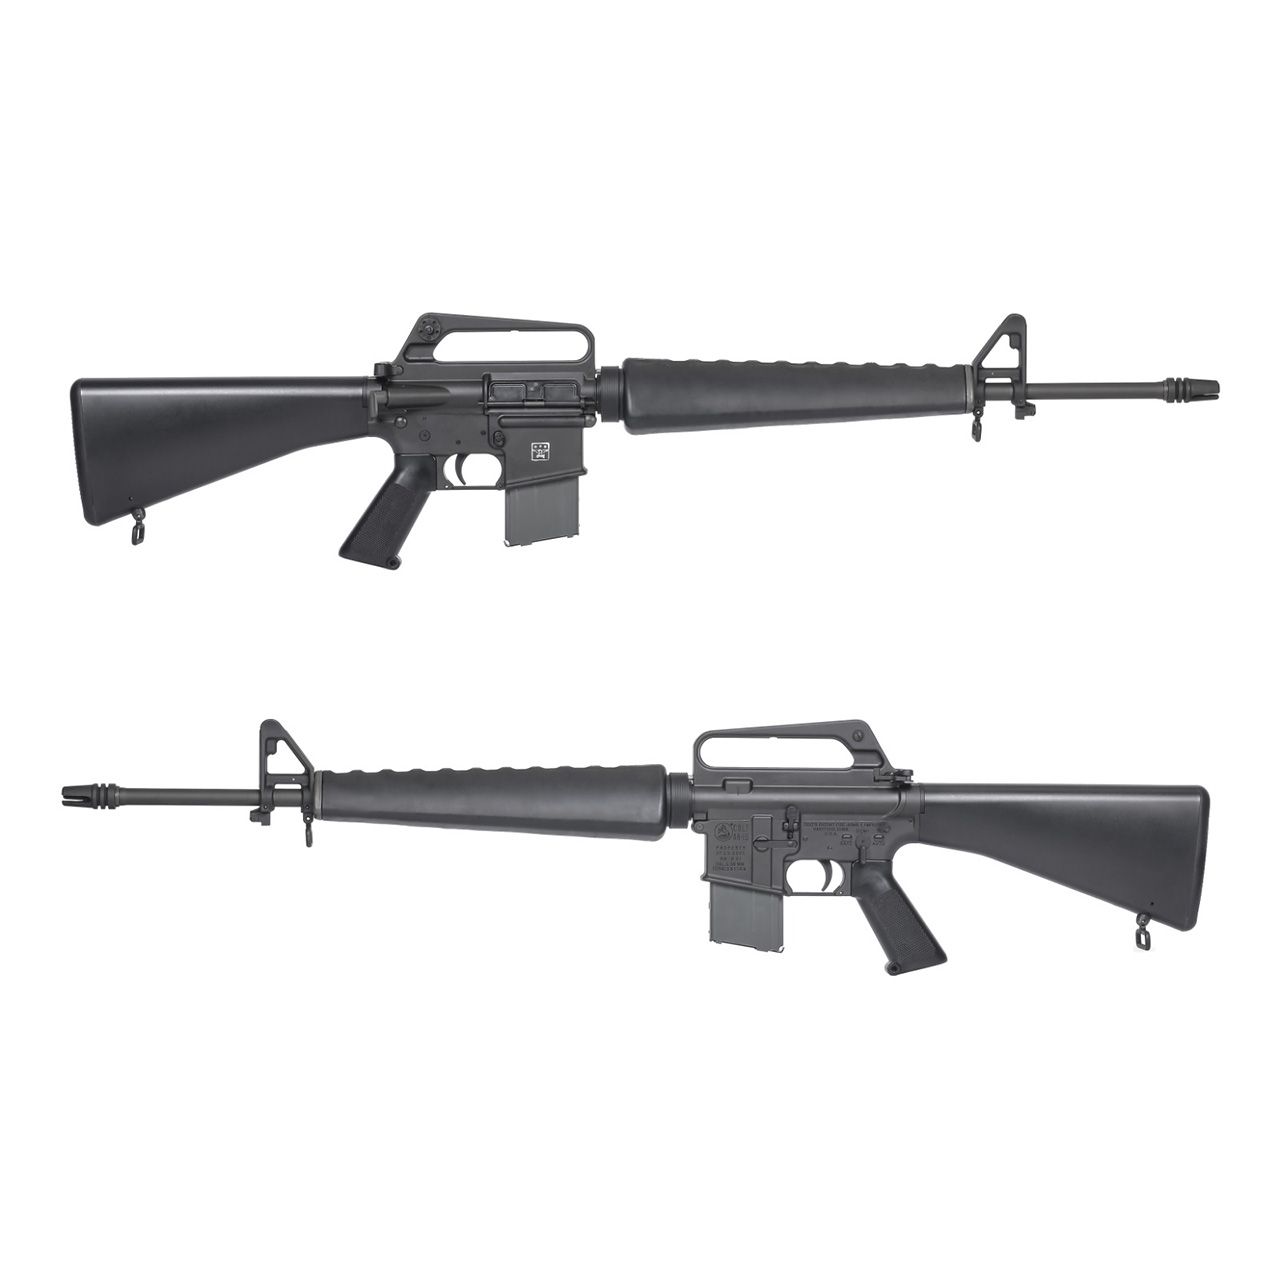 COLT Licensed XM16E1 / Mod 603 Early Type GBB Rifle Airsoft (by